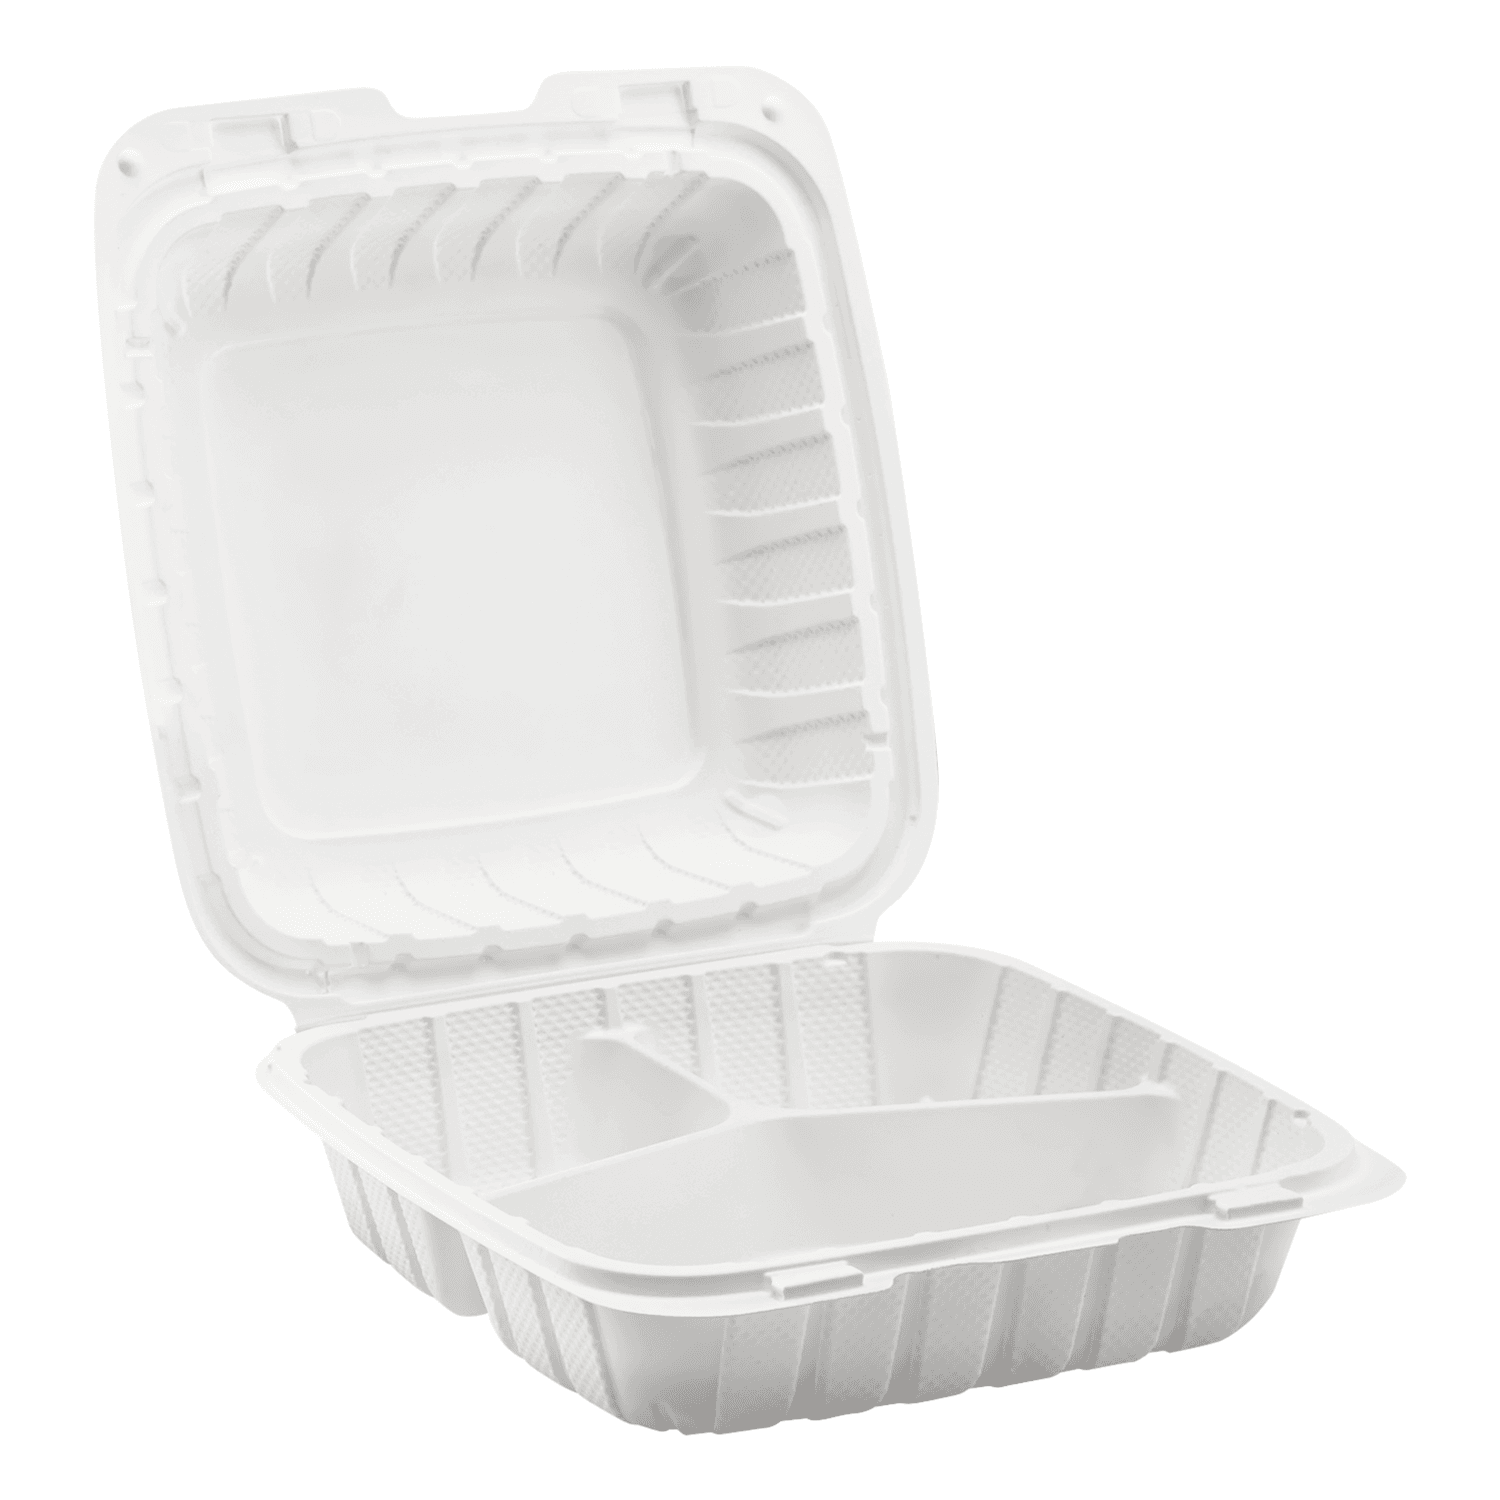 Karat Earth 8" x 8" Mineral Filled PP Hinged Container, White, 3 compartments - 200 pcs